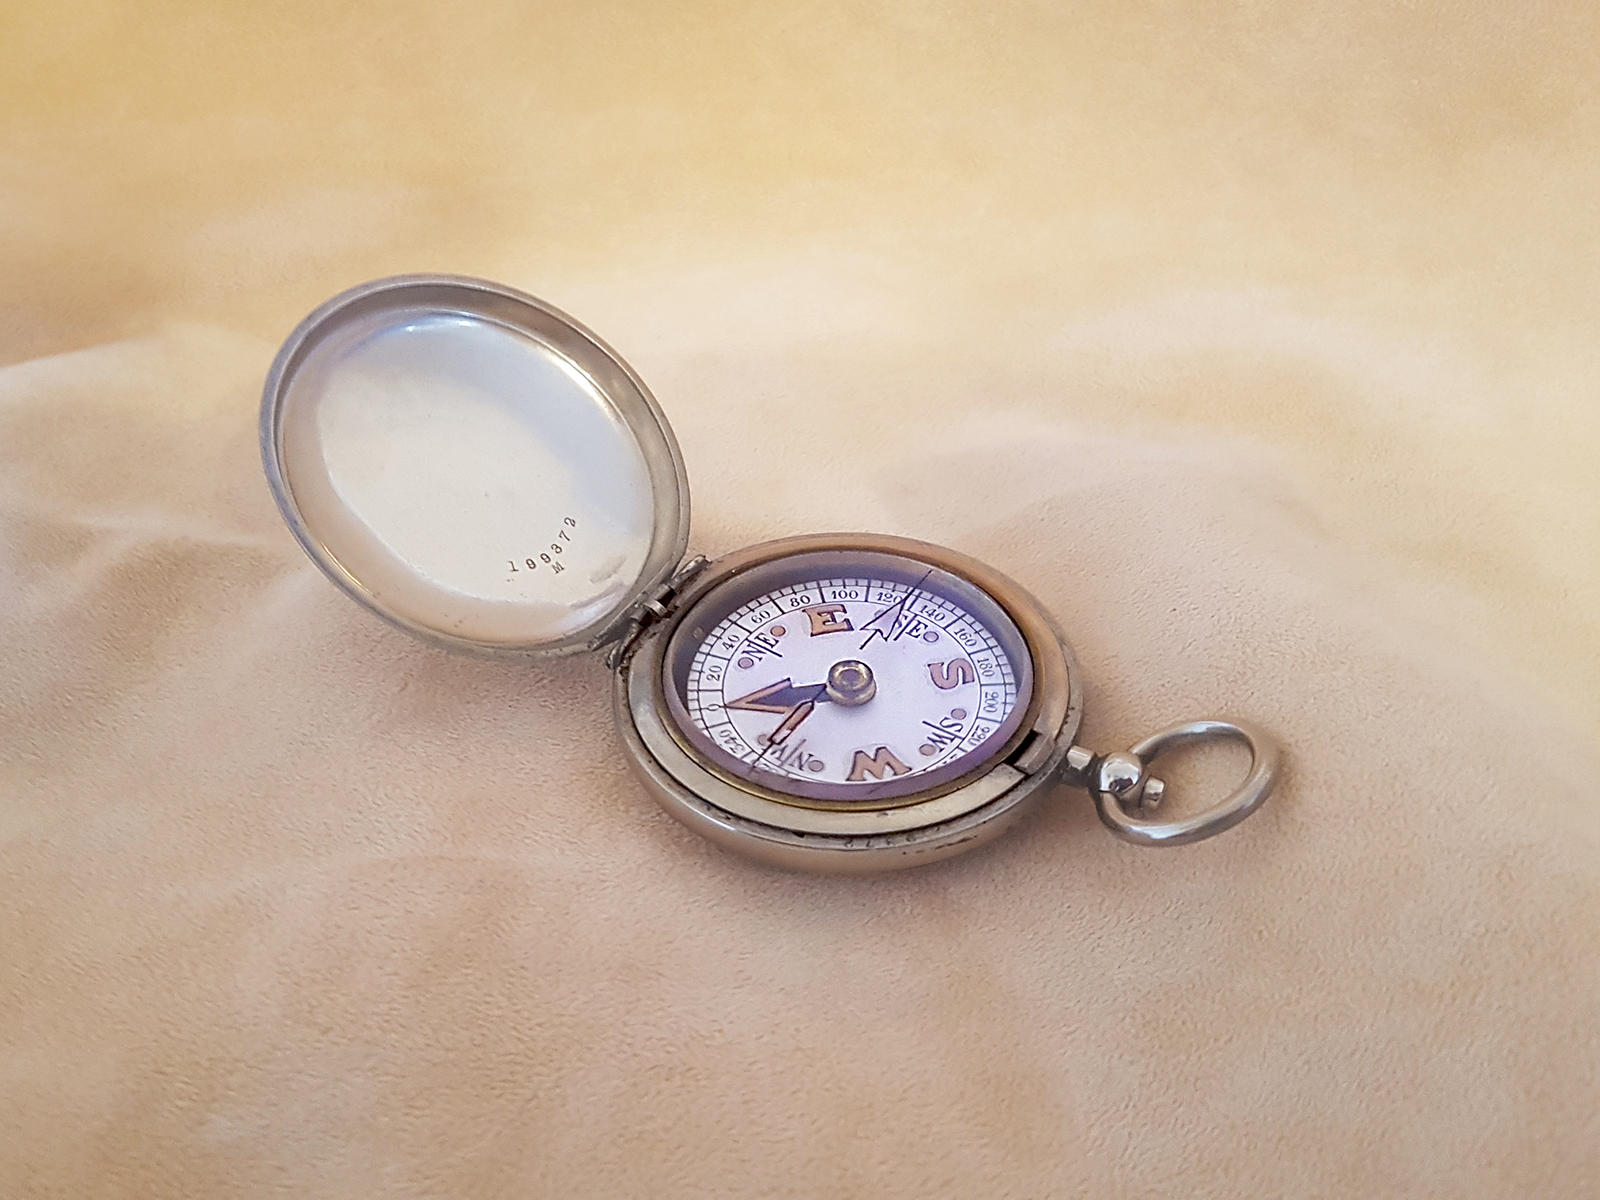 Dennison Cased Officers WW1 souvenir compass by L Kamm dated 1914-1919